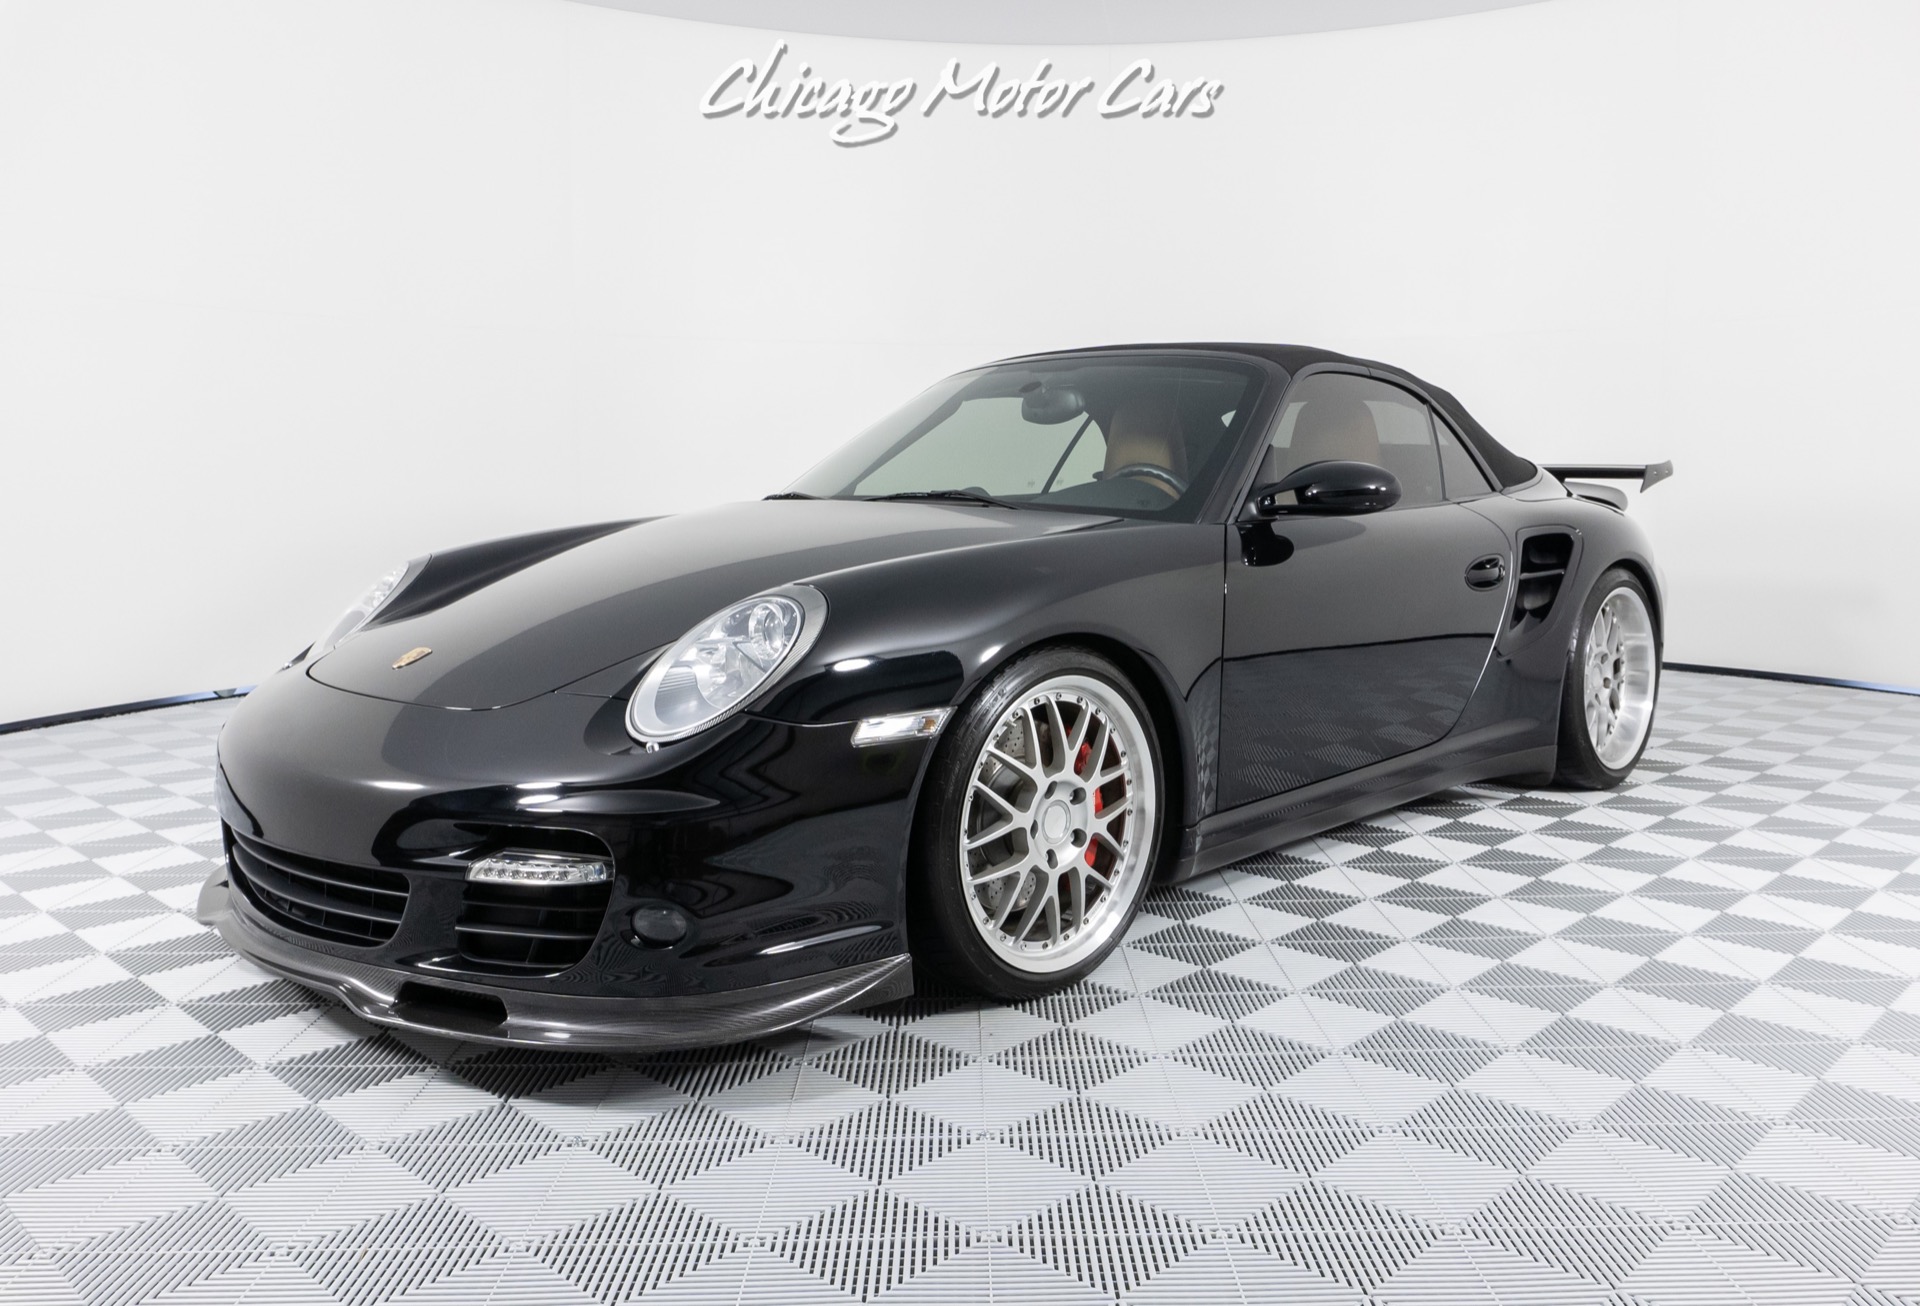 Used-2009-Porsche-911-Turbo-Convertible-UPGRADED-TURBOS-CARBON-FIBER-EXTERIOR-PACKAGE-LOADED